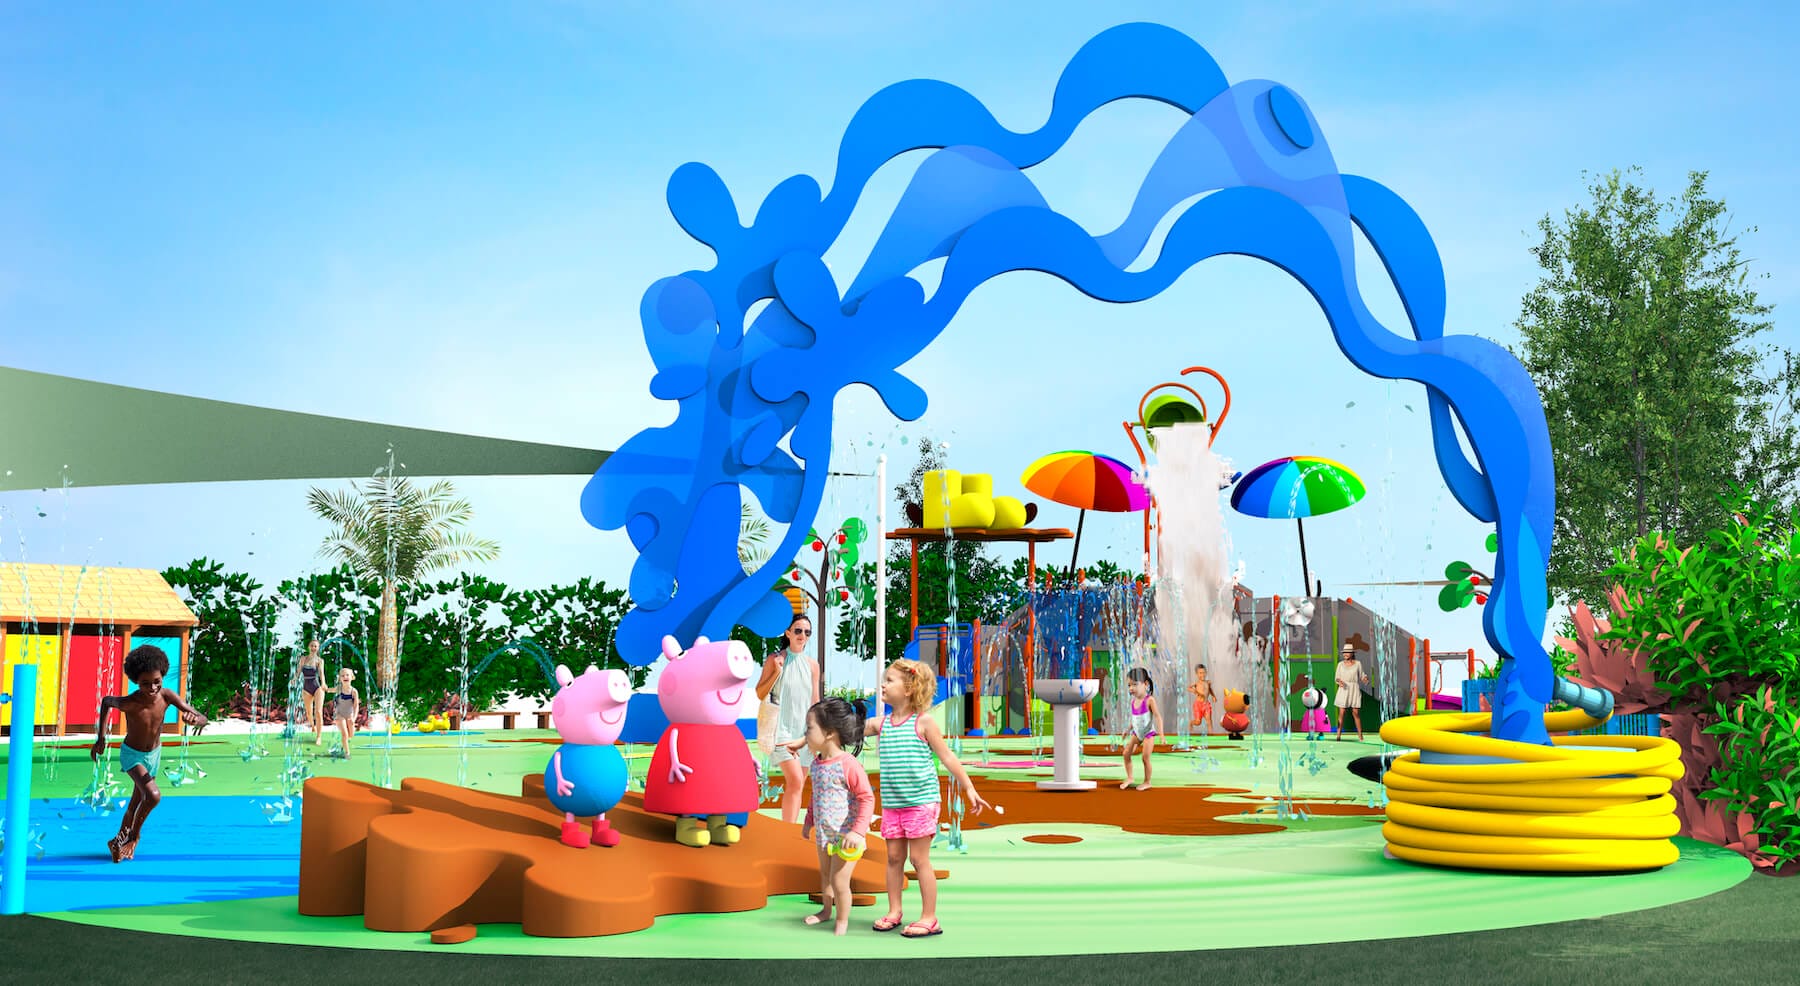 artist rendering of the new Muddy Puddles Splash Pad play area